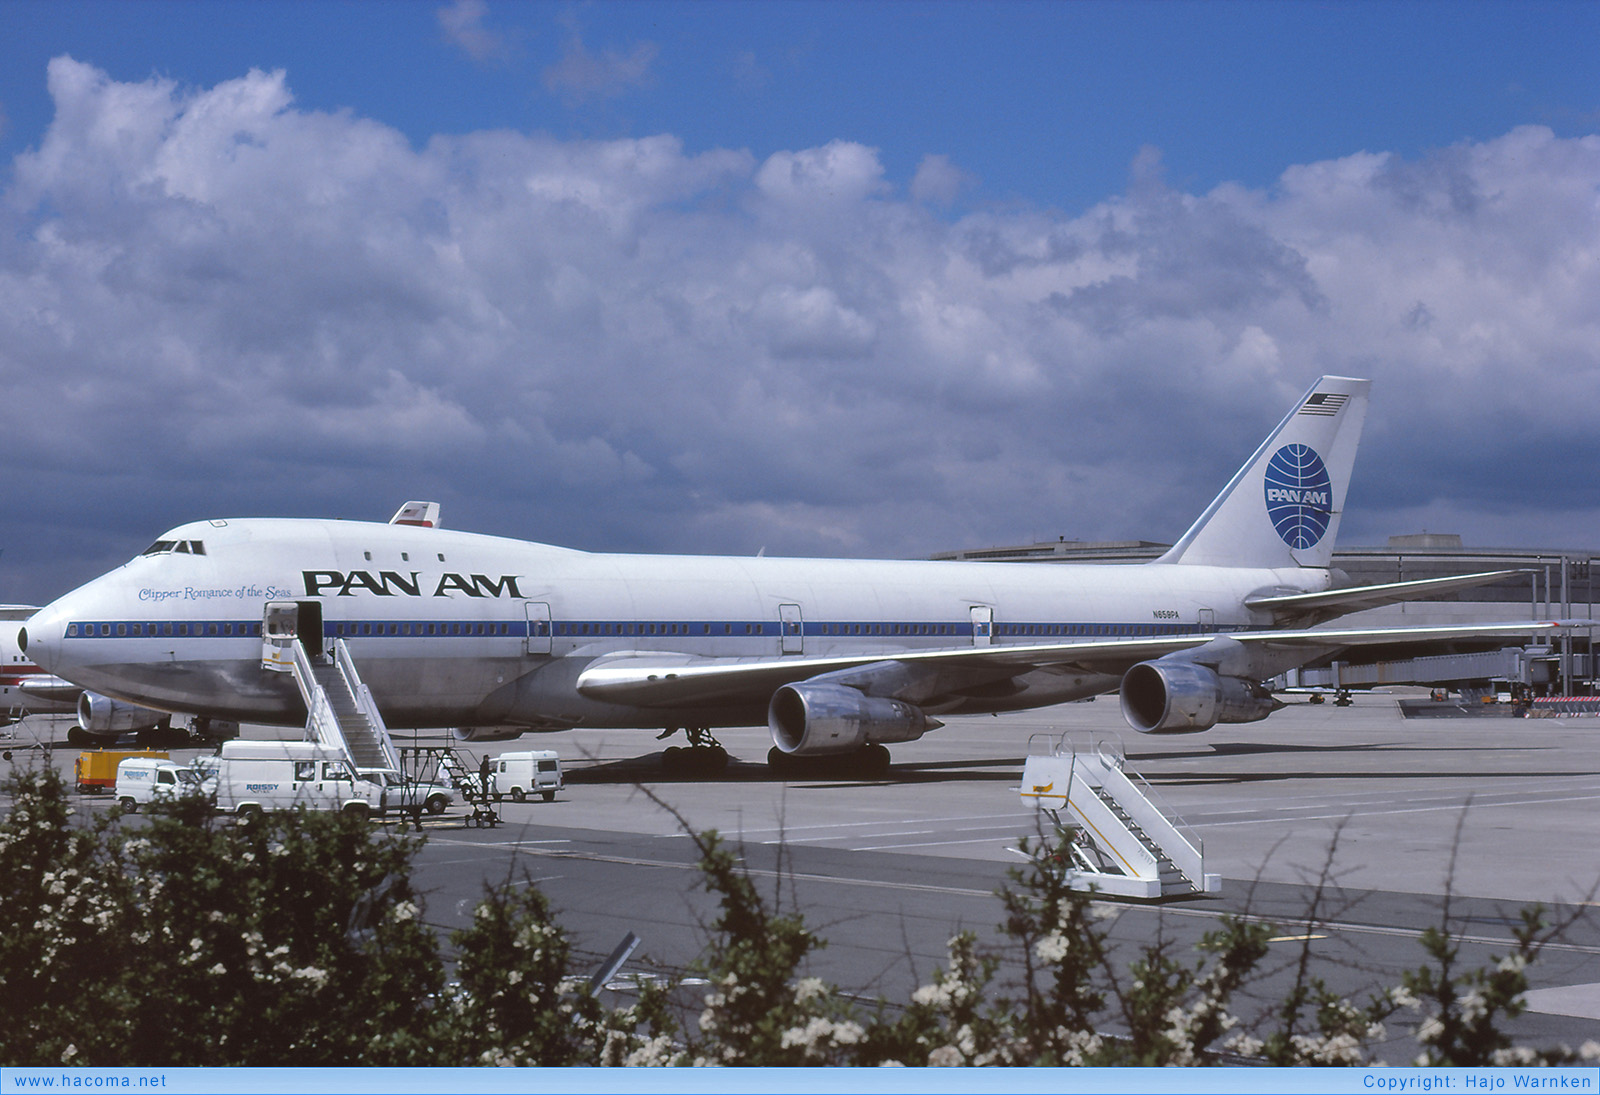 Photo of N659PA - Pan Am Clipper Plymouth Rock  / Romance of the Seas / Plymouth Rock / Voyager - Paris Charles de Gaulle Airport